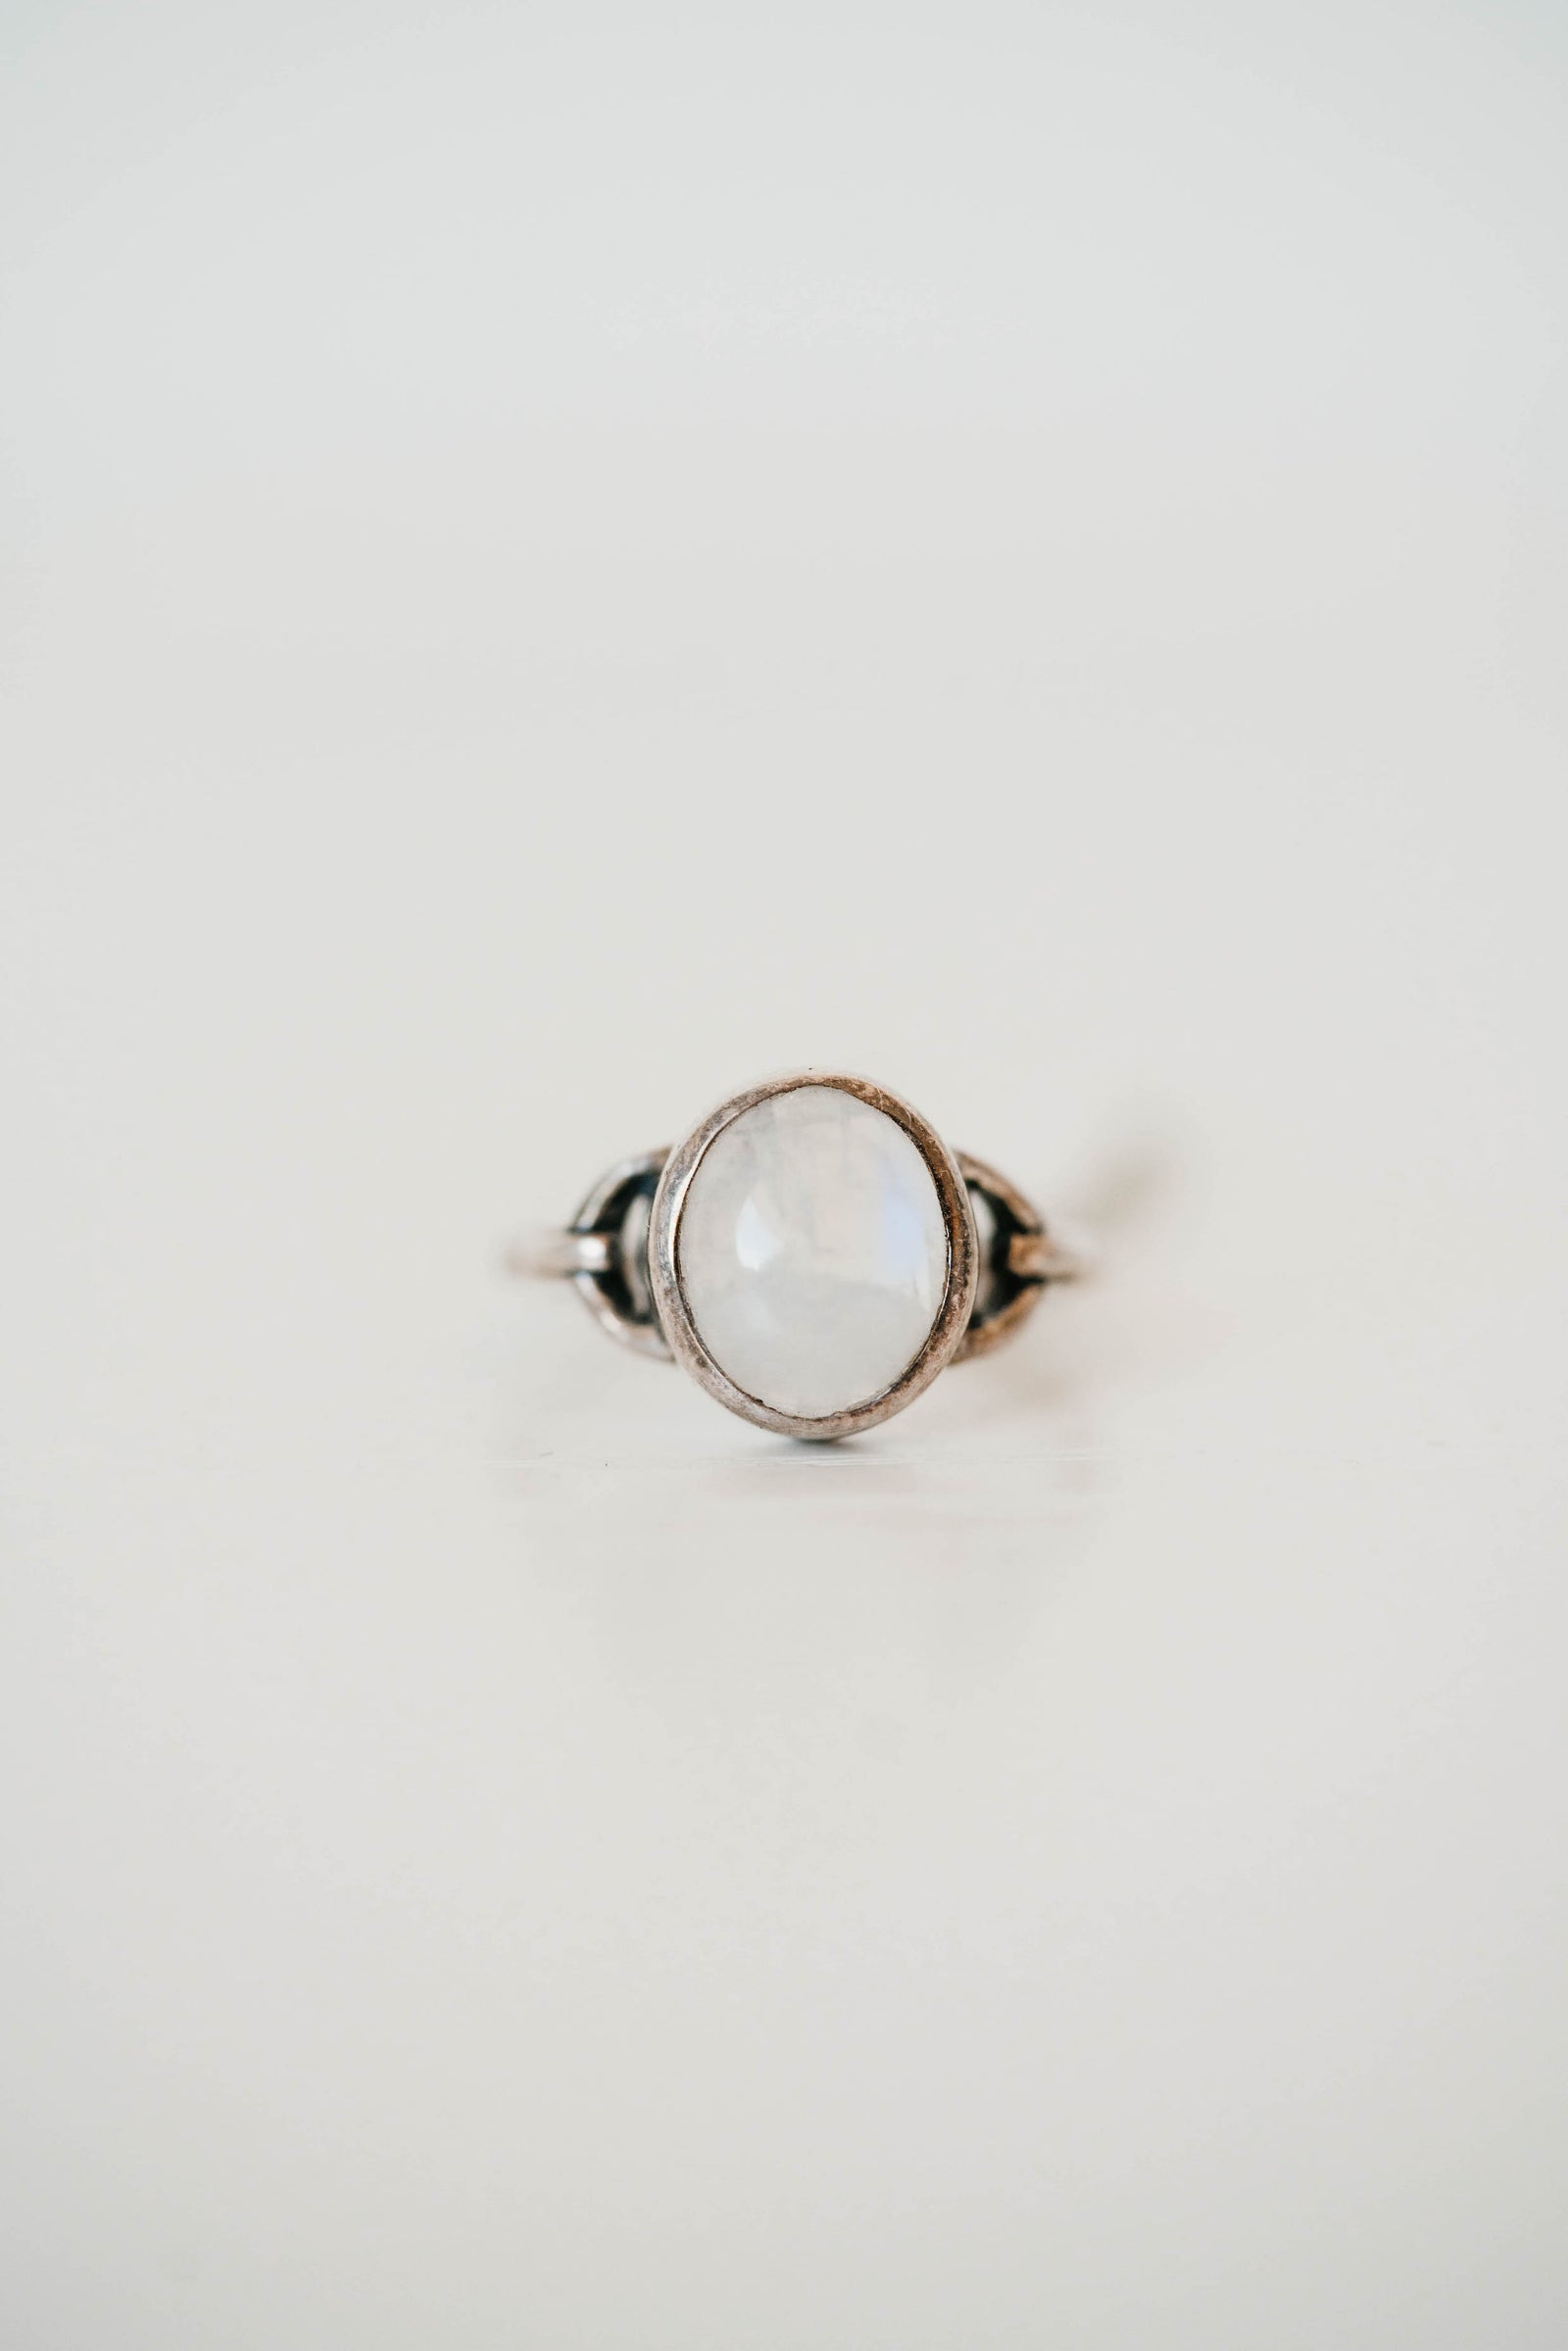 Polly Ring - FINAL SALE